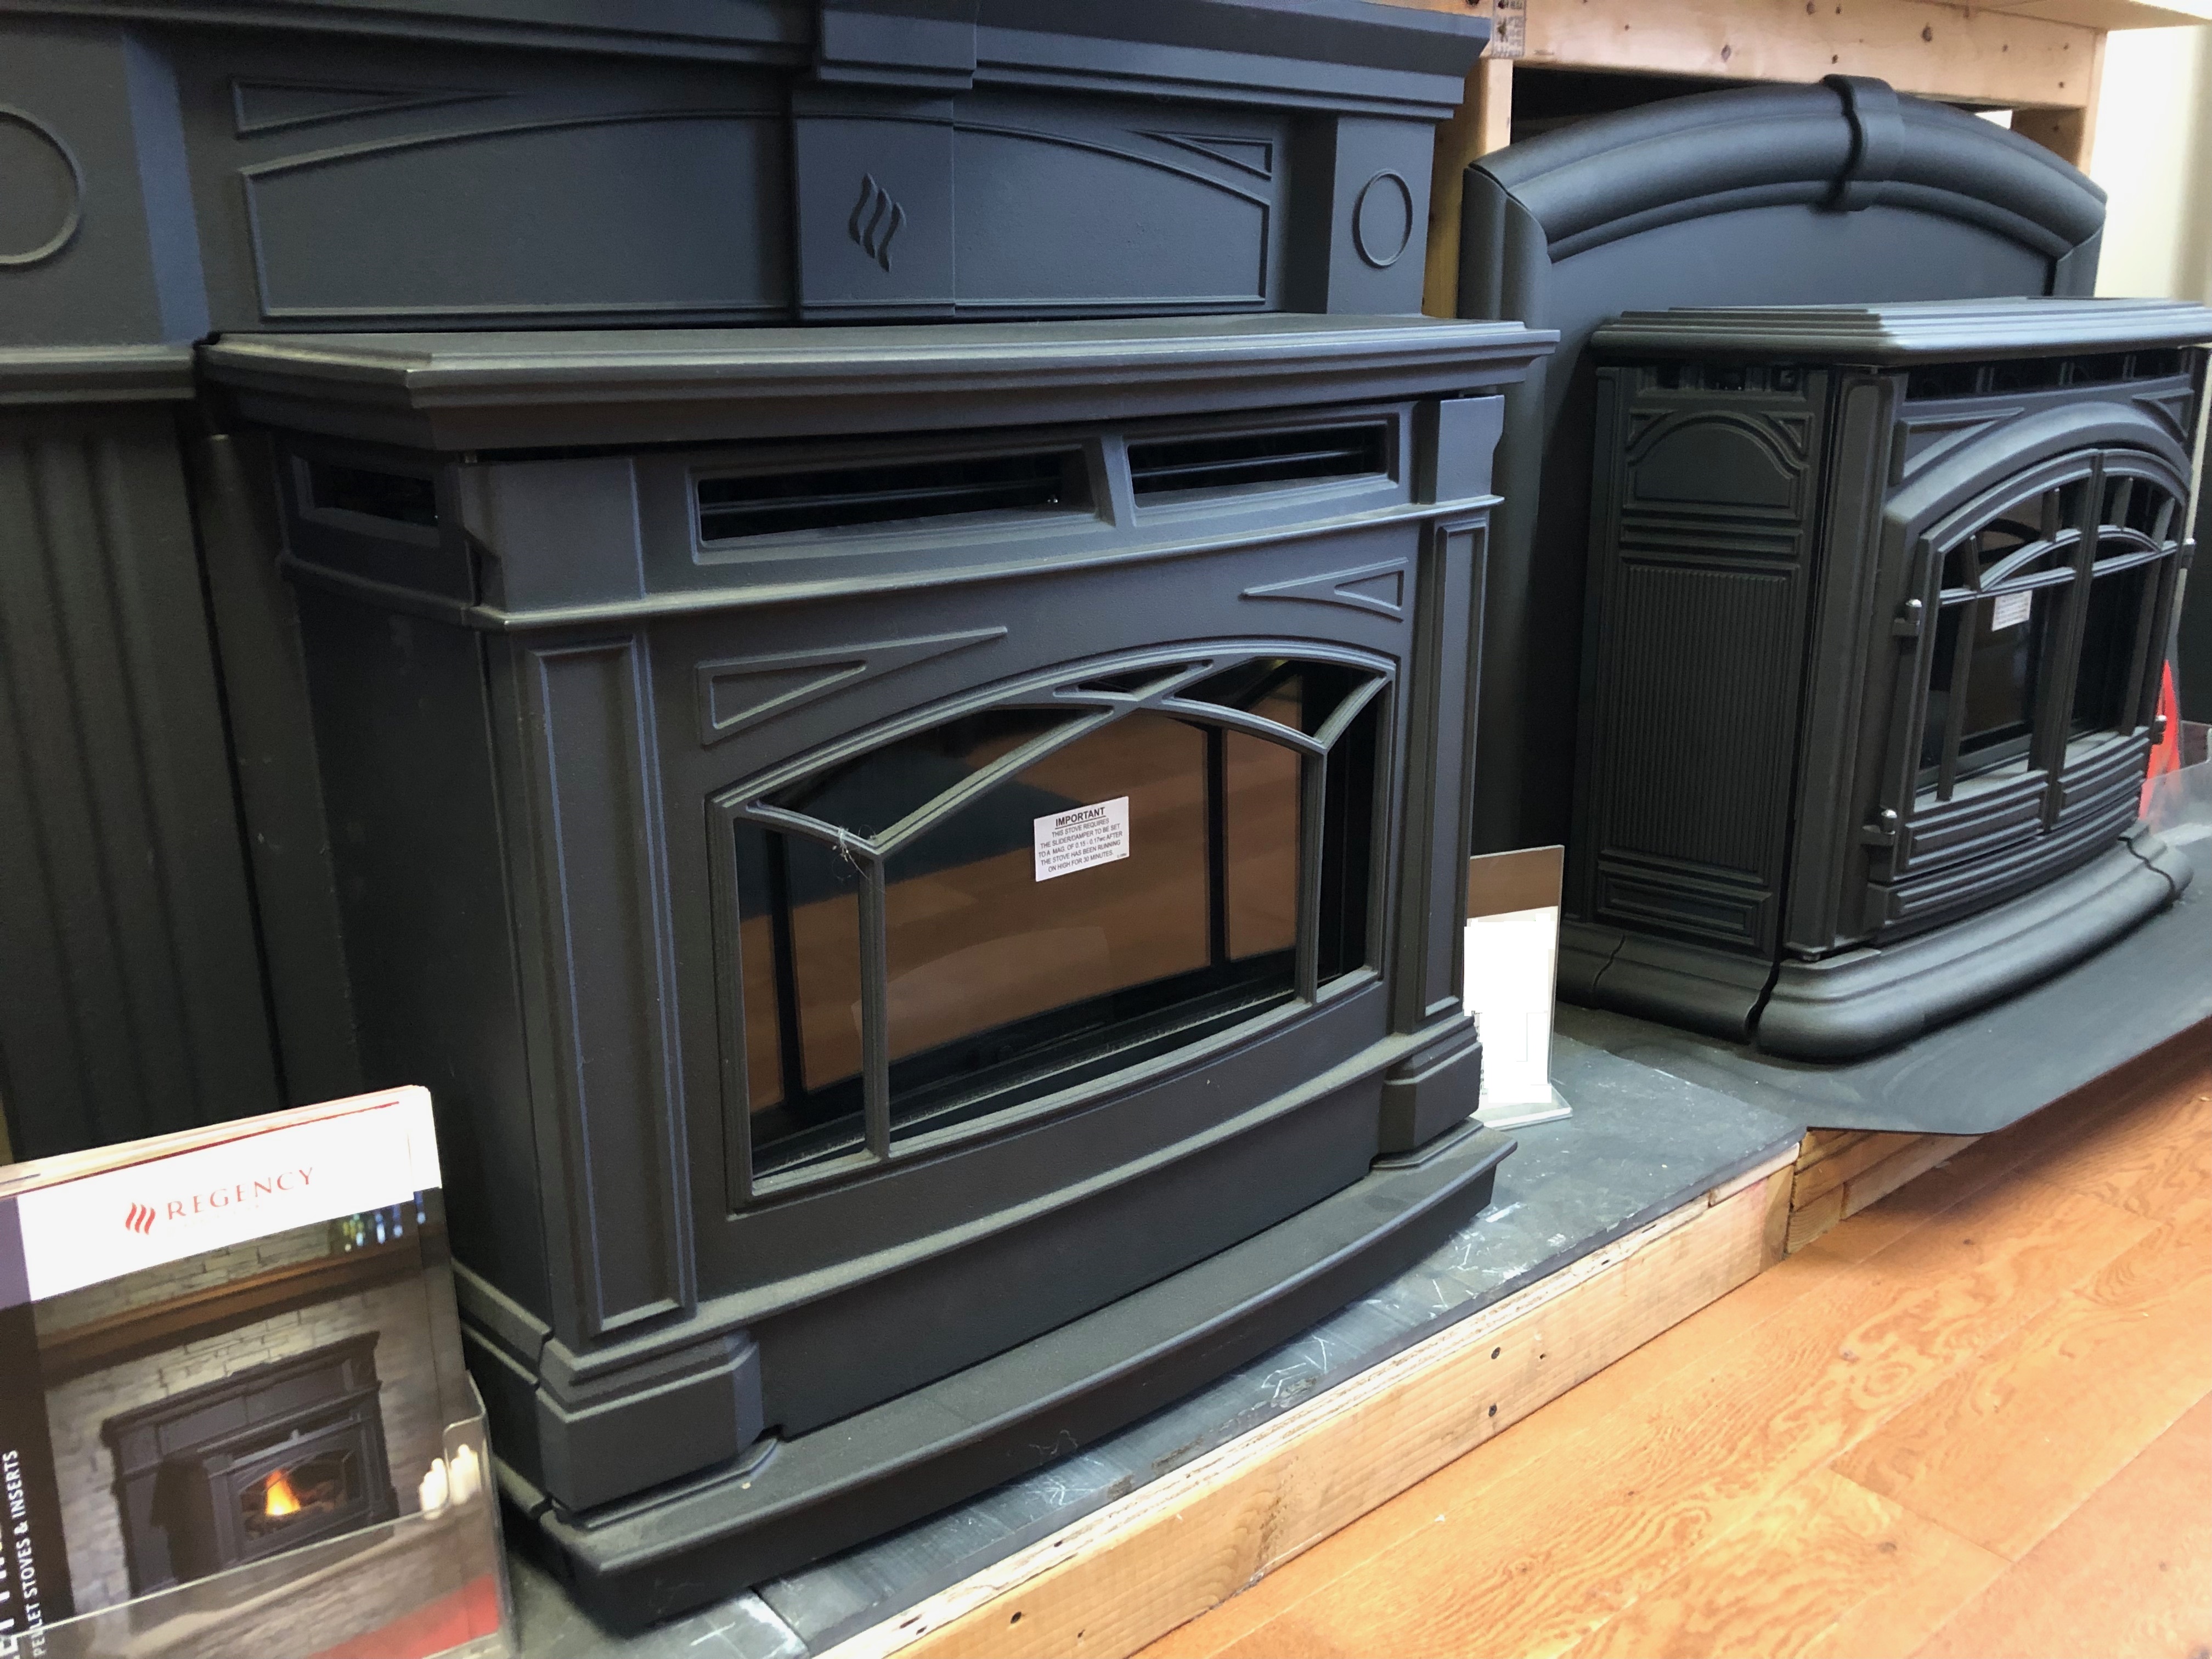 Niche Wood Stoves Retail Business in Connecticut